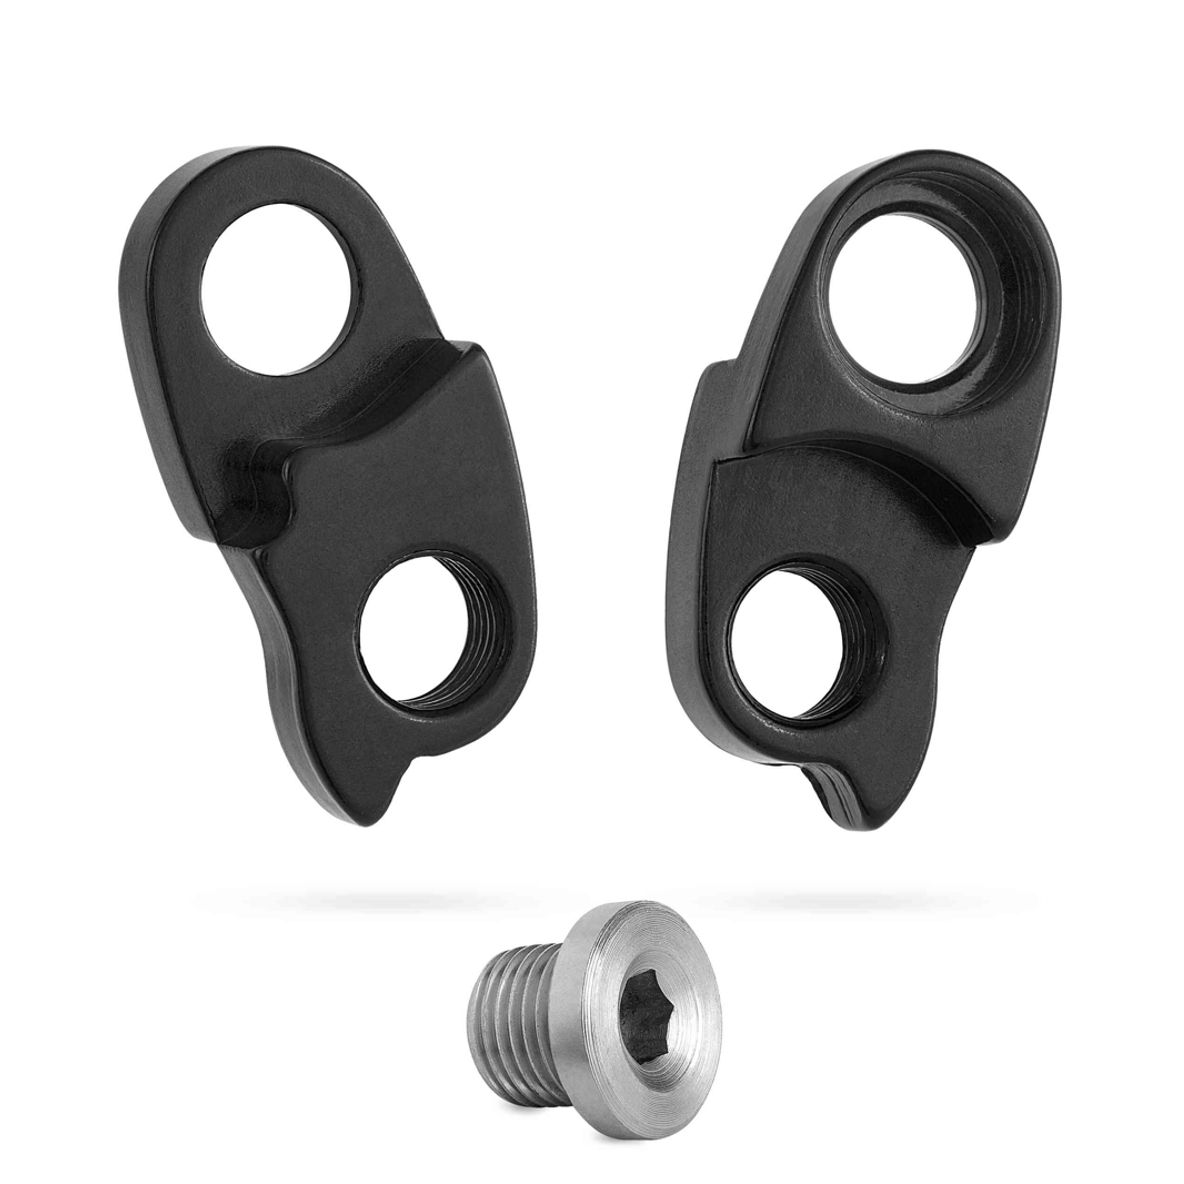 A003 - Derailleur Hanger Extender for SRAM for use of Cogs of 40D to 50D